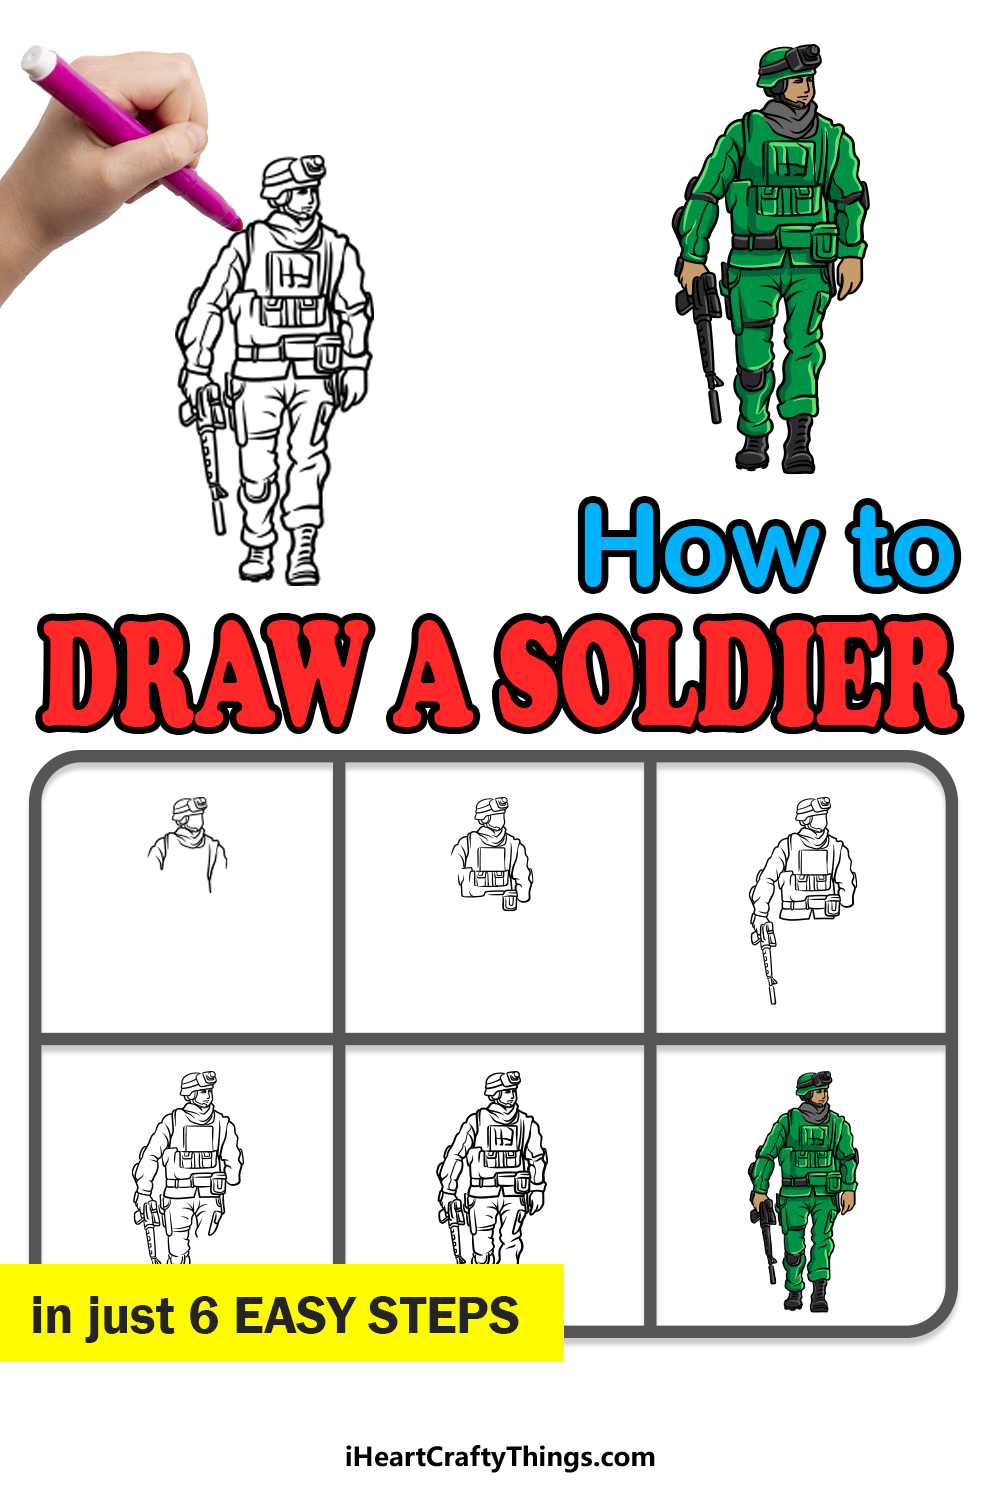 how to draw a soldier in 6 easy steps